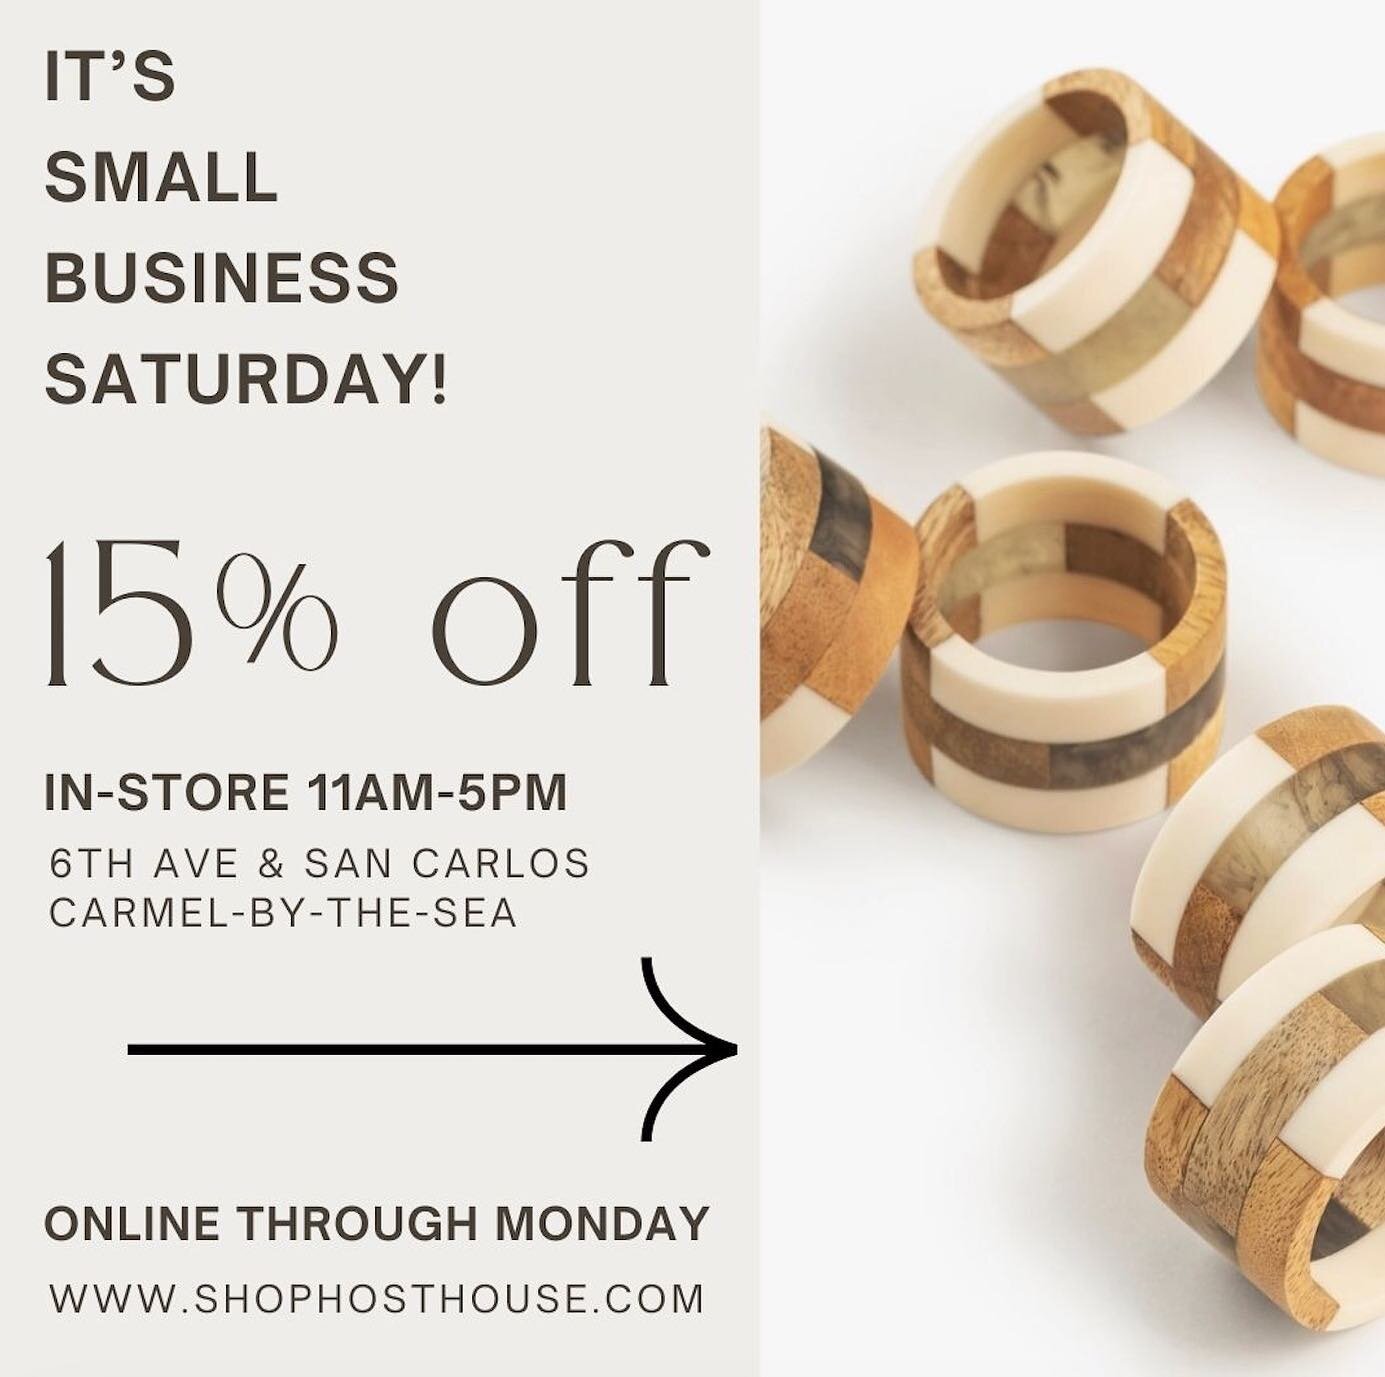 We are celebrating Small Business Saturday with 15% off in-store and online. Stop by today and say hello to Susan, 11am-5pm, in #carmelbythesea on 6th Ave at San Carlos! #shopsmall #shopsmallbusiness #shoplocal #hosthousecarmel #hosthouse